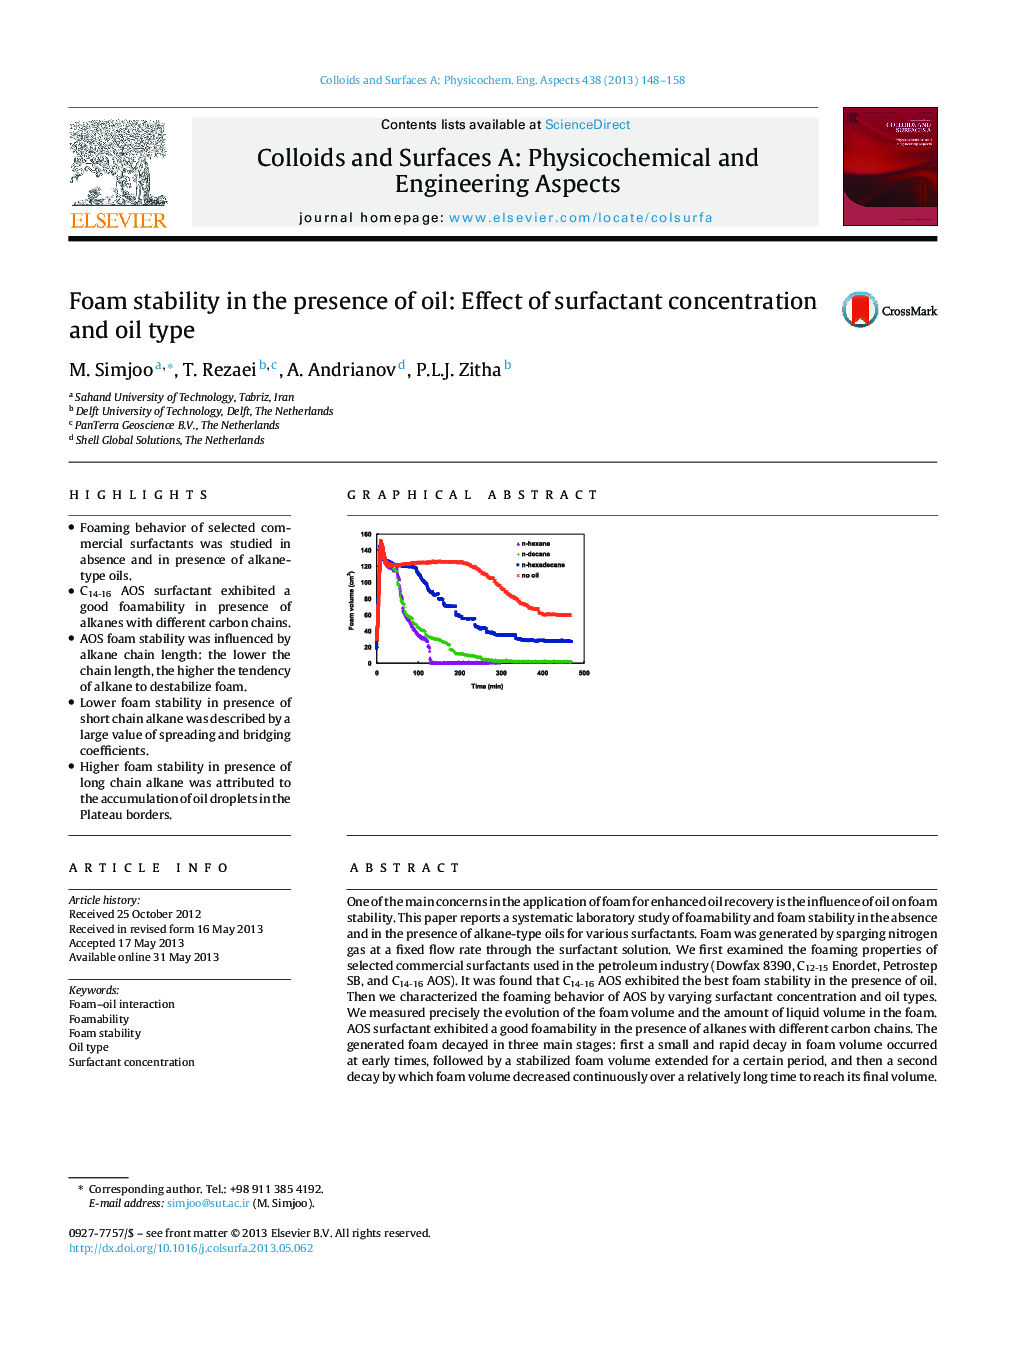 Foam stability in the presence of oil: Effect of surfactant concentration and oil type